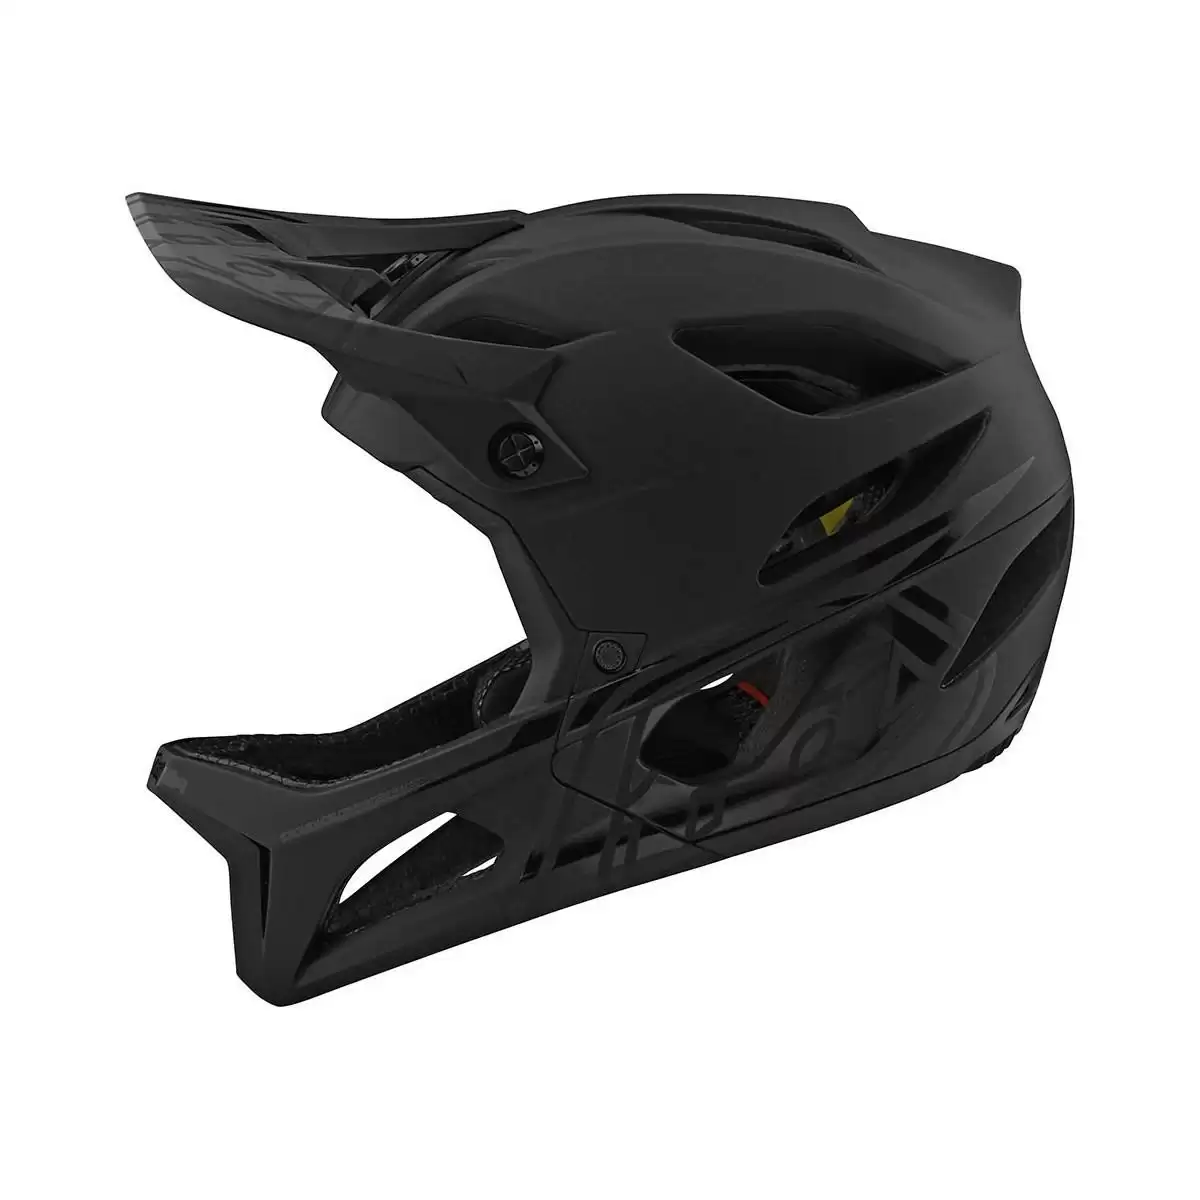 Full Face Helmet Stage MIPS Stealth Midnight Black Size XL/XXL - image